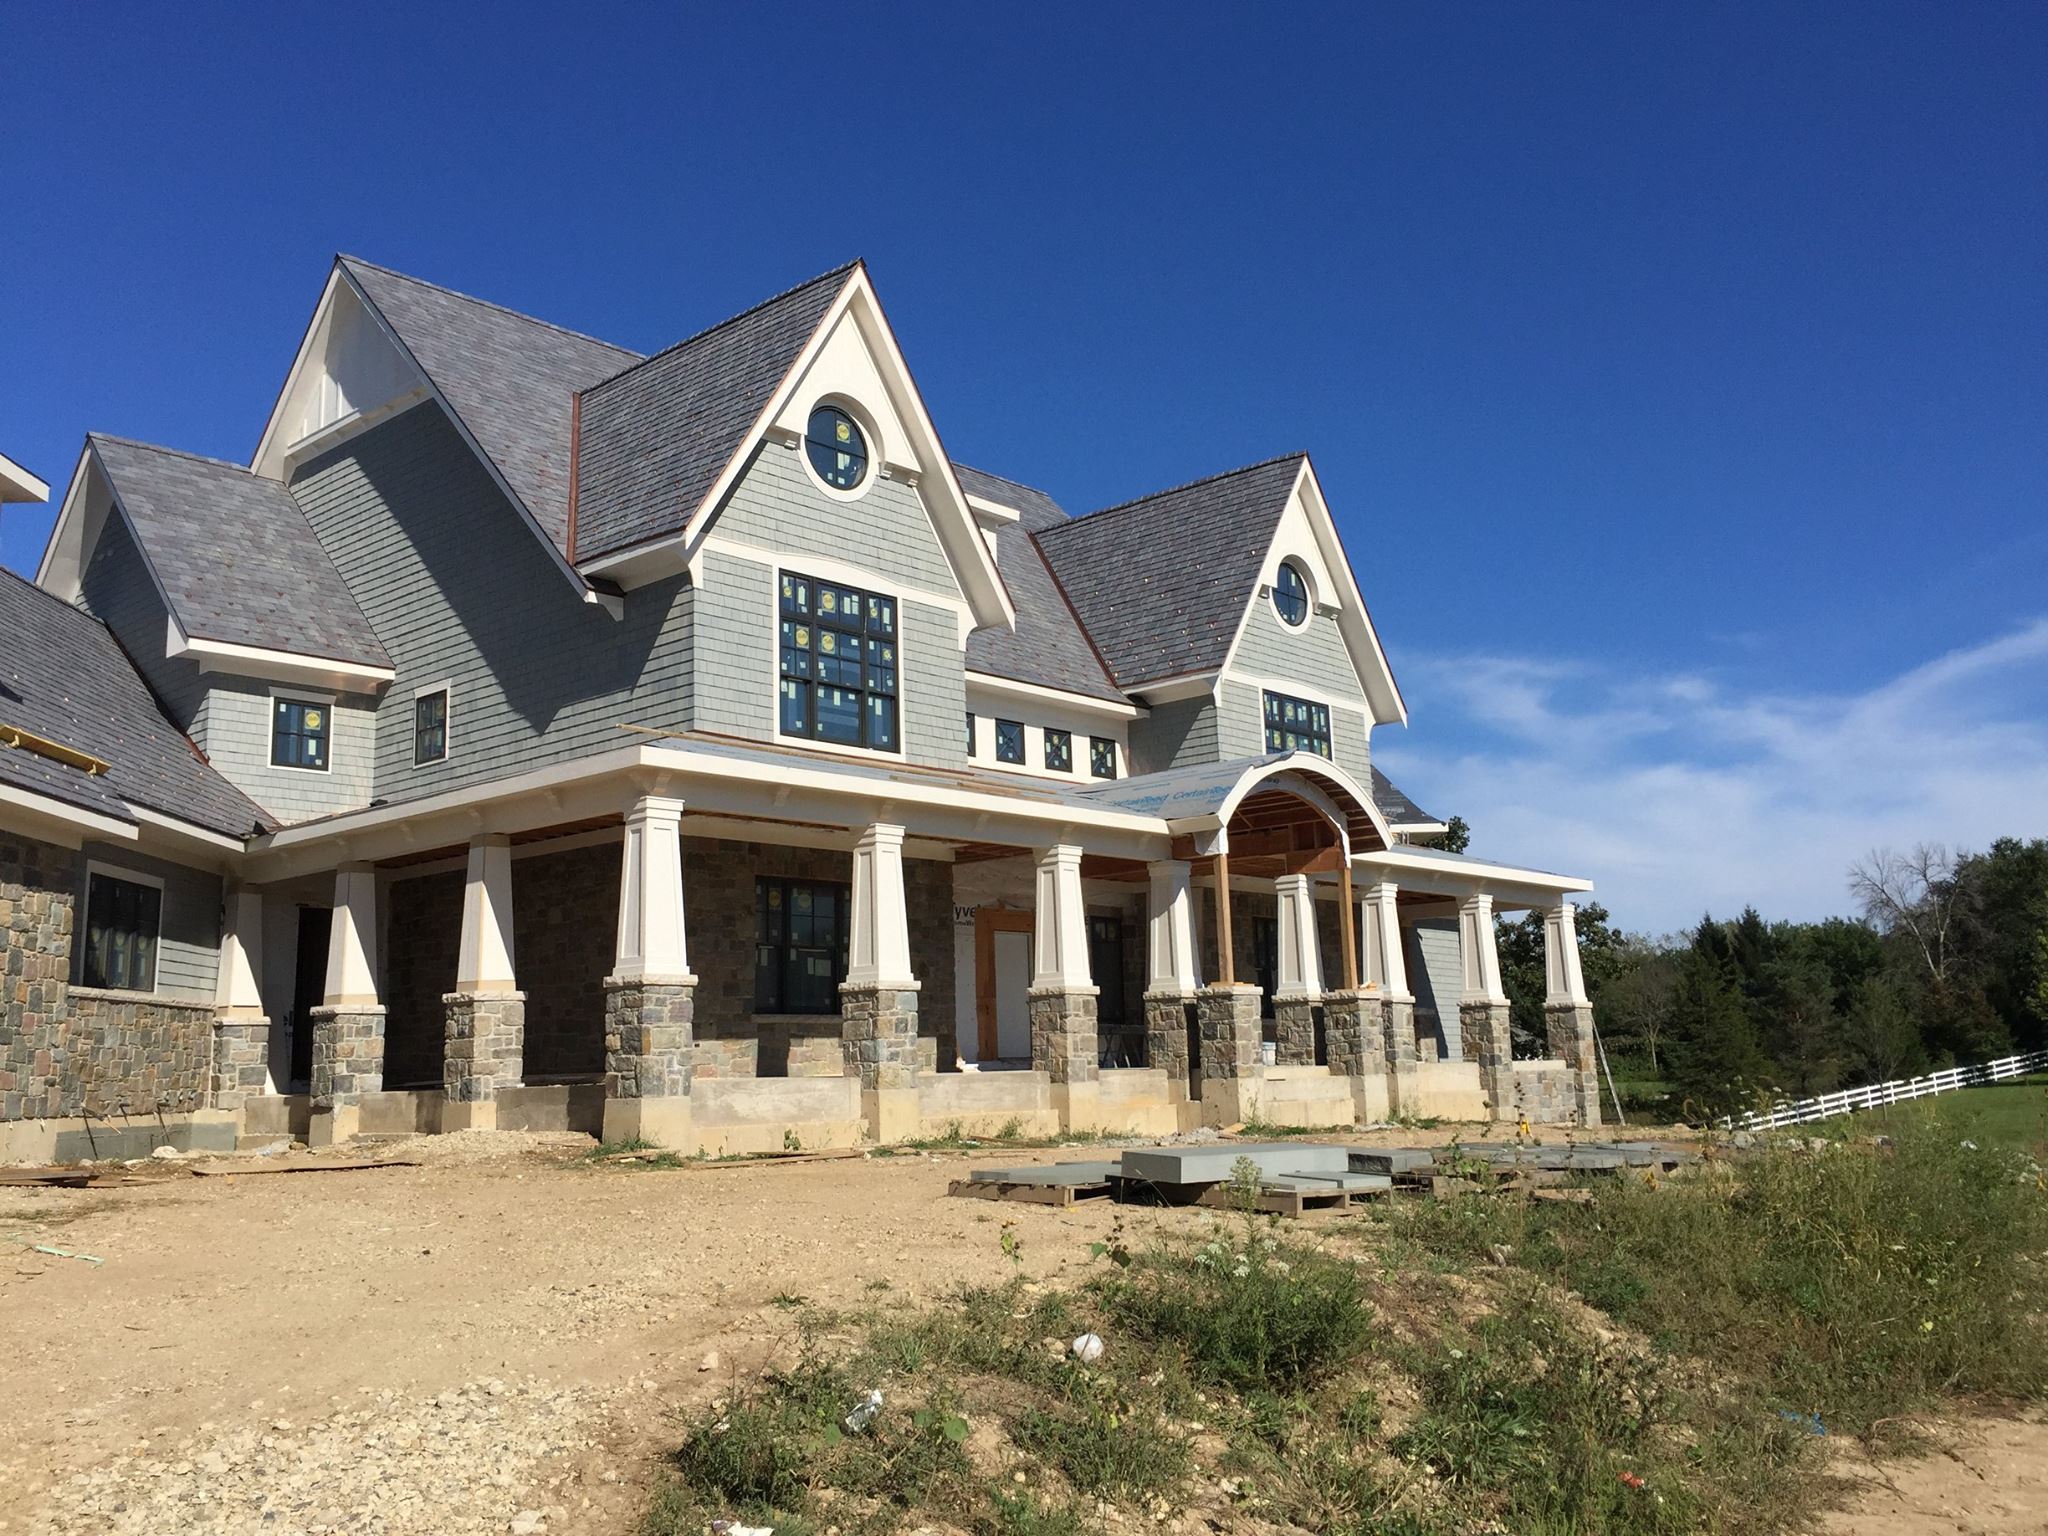 Light gray cedar shake siding with white trim and wall paneling. Tapered porch columns with stone veneer bases. Black framed windows. Brown stone veneer.